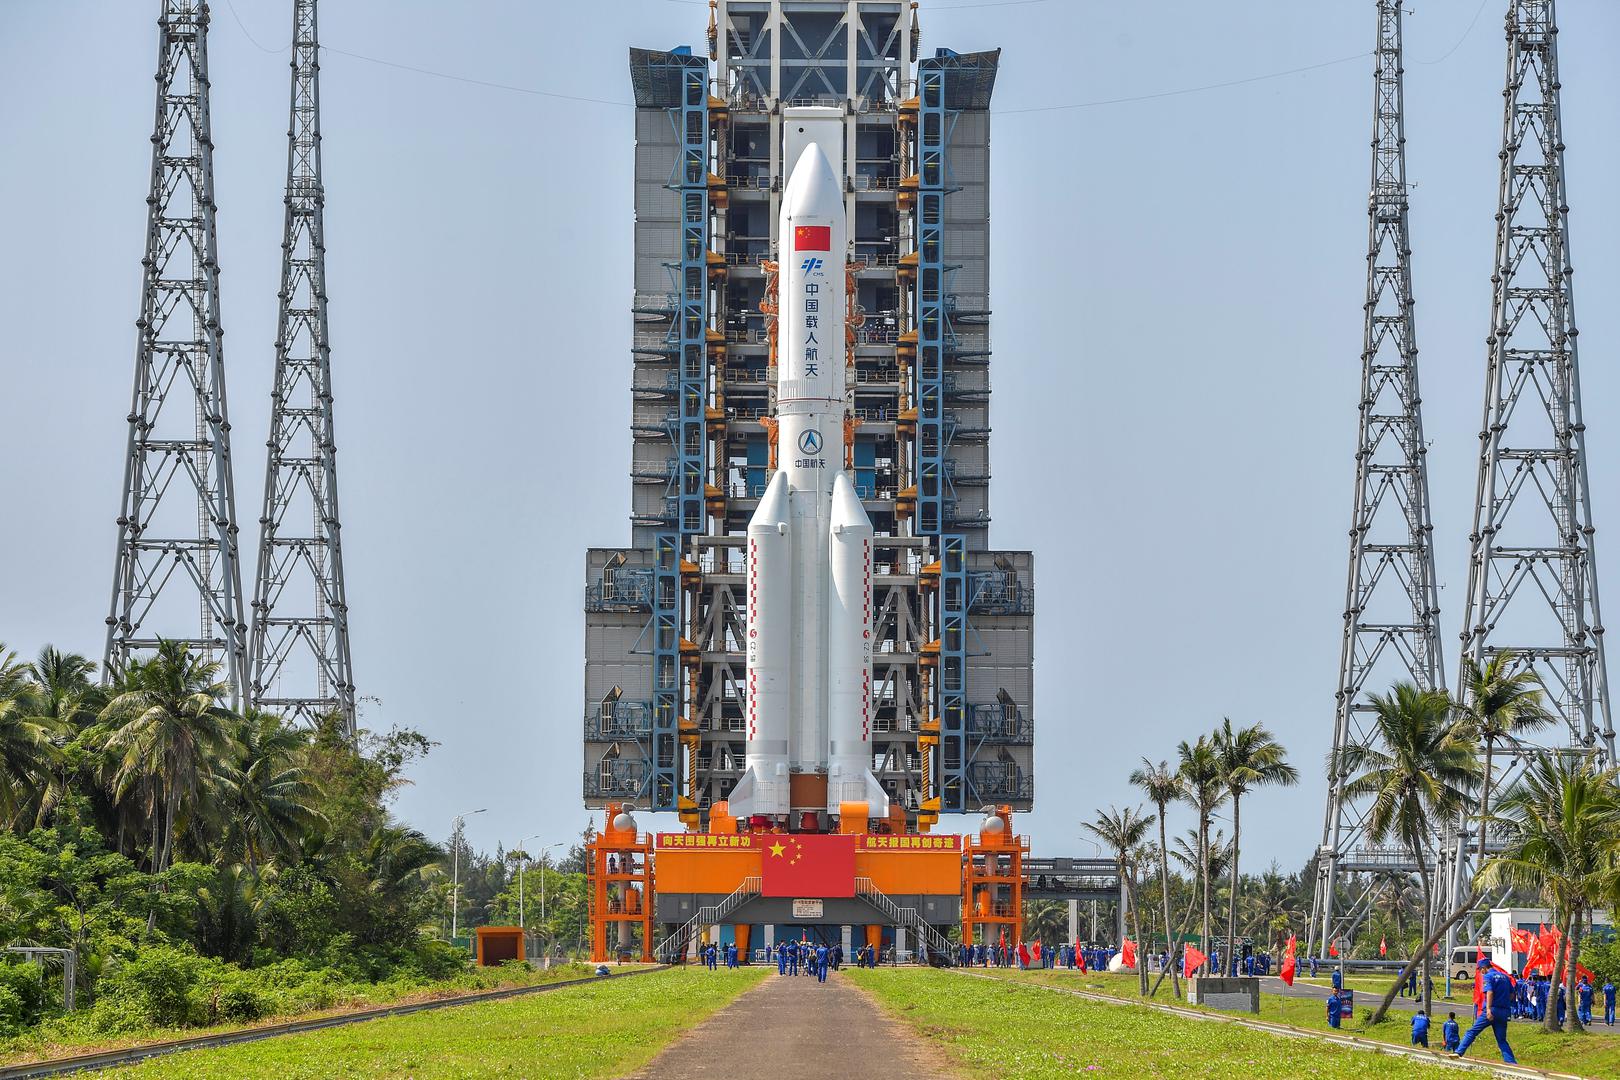 The Long March-5B Y2 rocket, carrying the core module of China's space station Tianhe, sits at the launch pad of Wenchang Space Launch Center The Long March-5B Y2 rocket, carrying the core module of China's space station Tianhe, sits at the launch pad of Wenchang Space Launch Center in Hainan province, China April 23, 2021. cnsphoto via REUTERS   ATTENTION EDITORS - THIS IMAGE WAS PROVIDED BY A THIRD PARTY. CHINA OUT. STRINGER